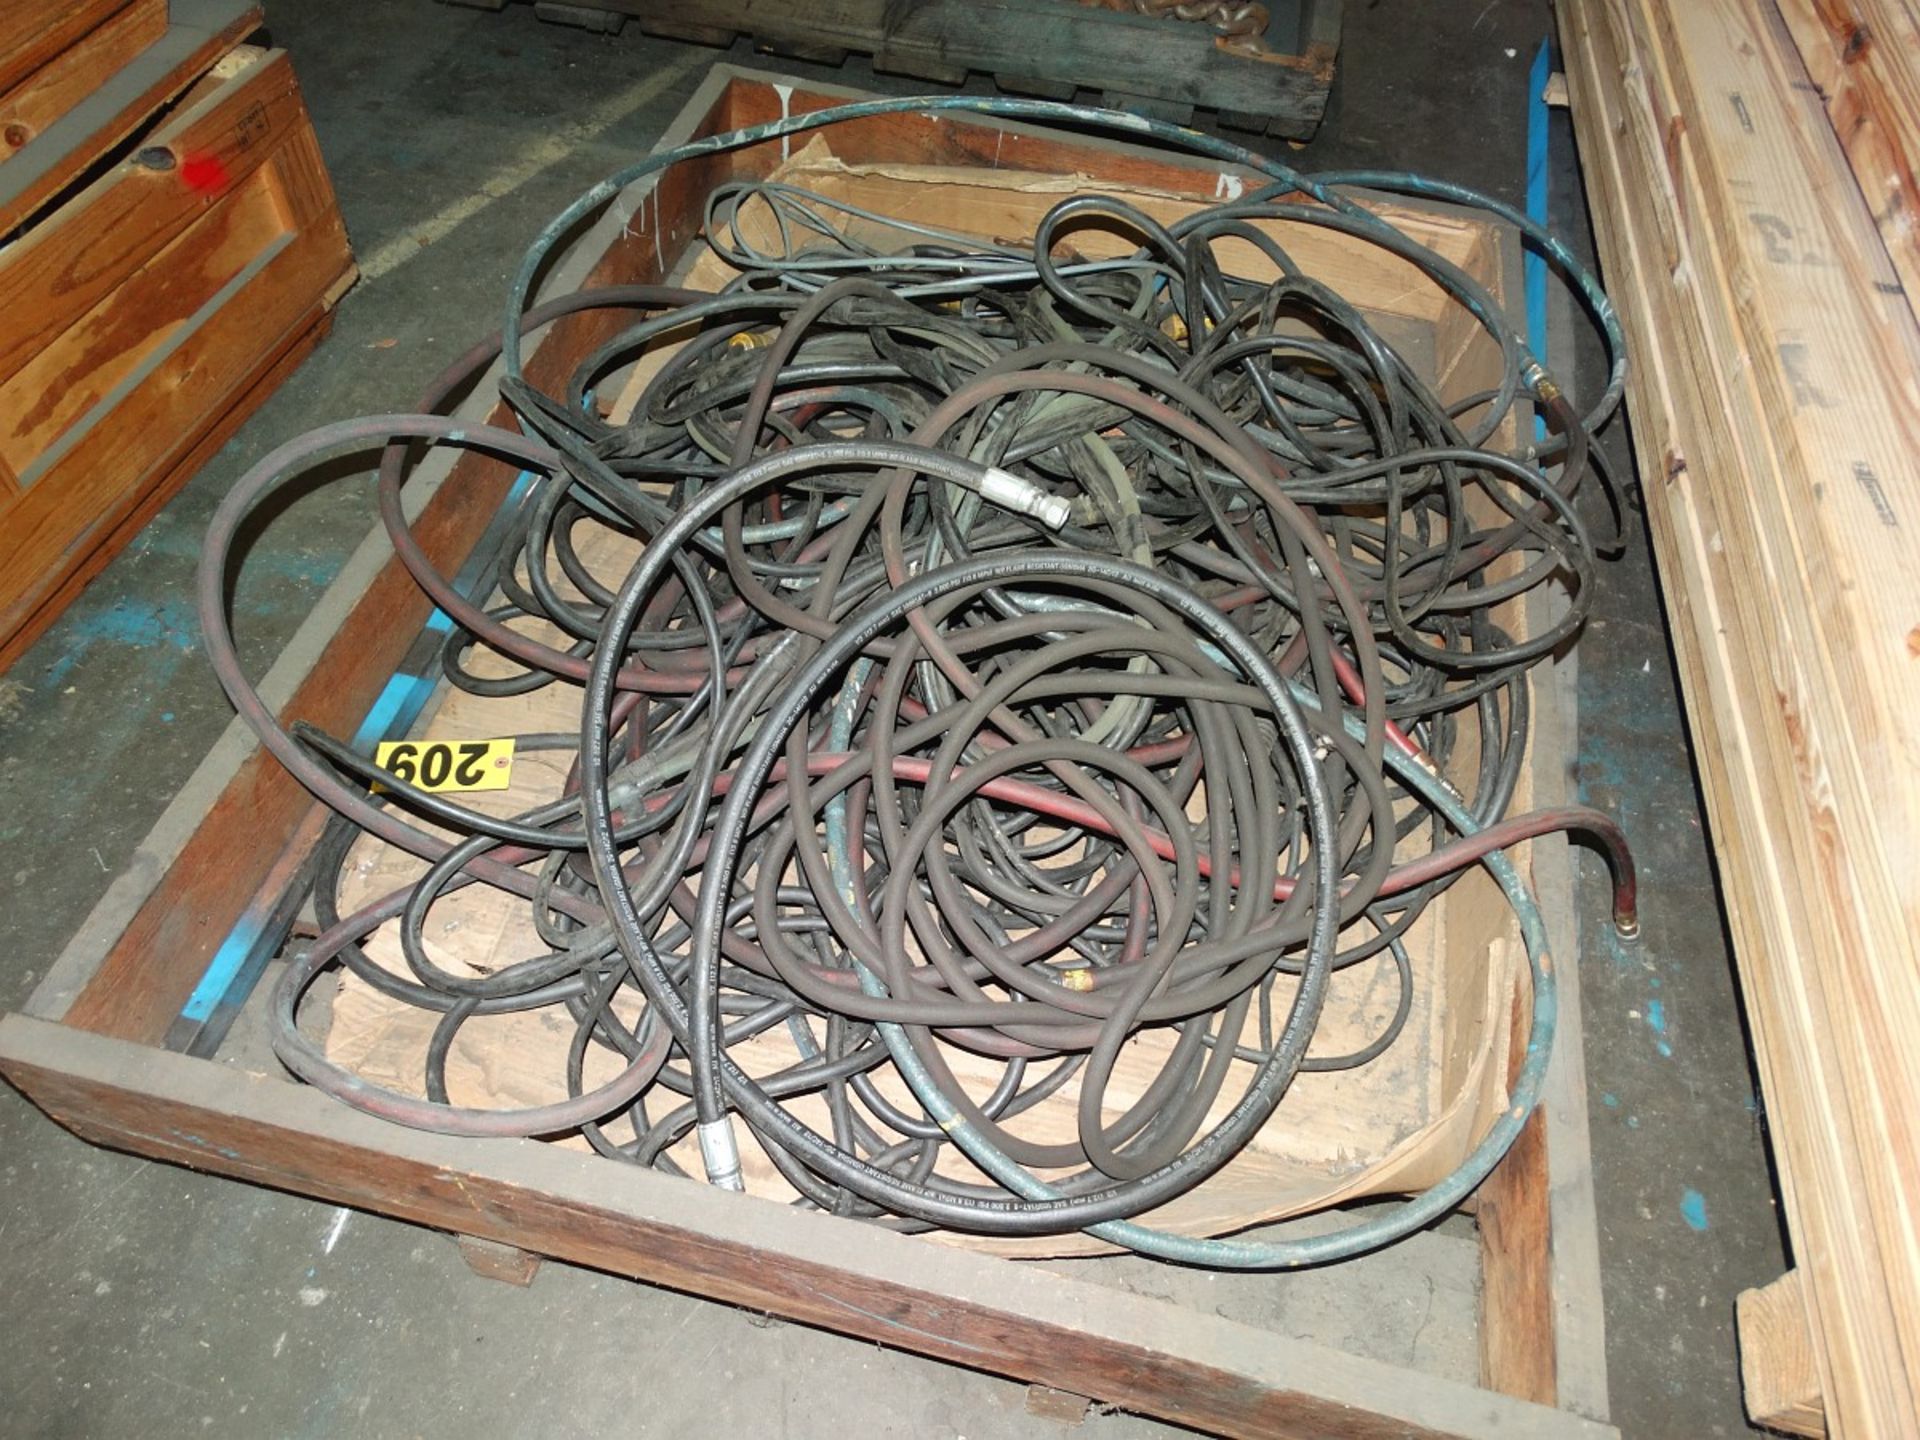 Electrical Cords & Air Hoses